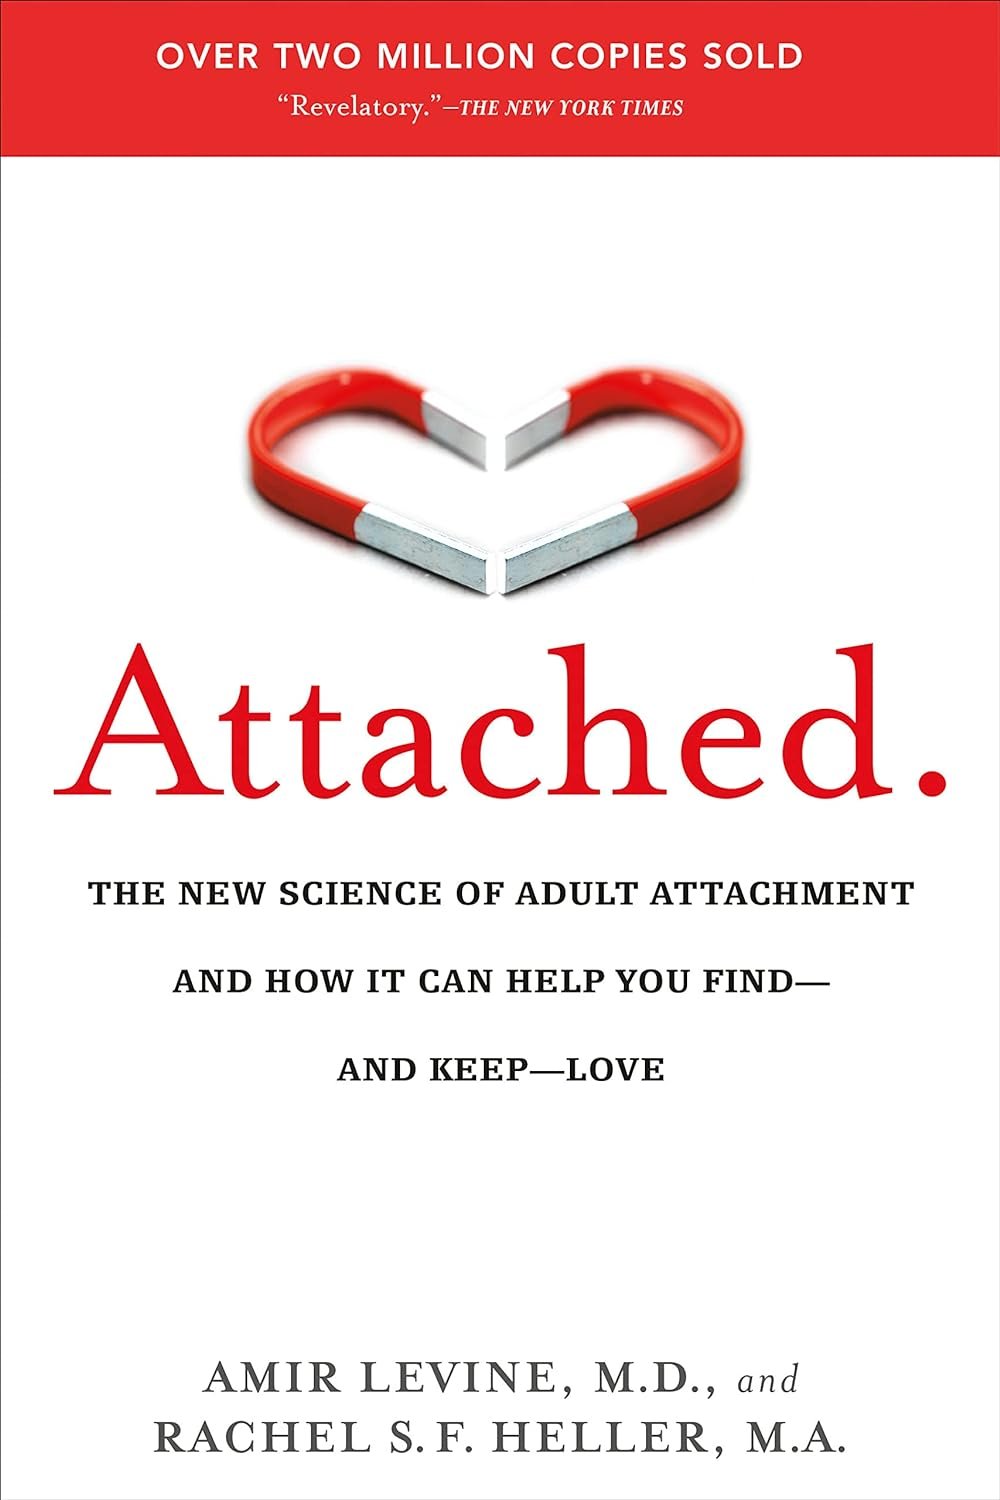 Attached: The New Science of Adult Attachment and How It Can Help You Find and Keep Love